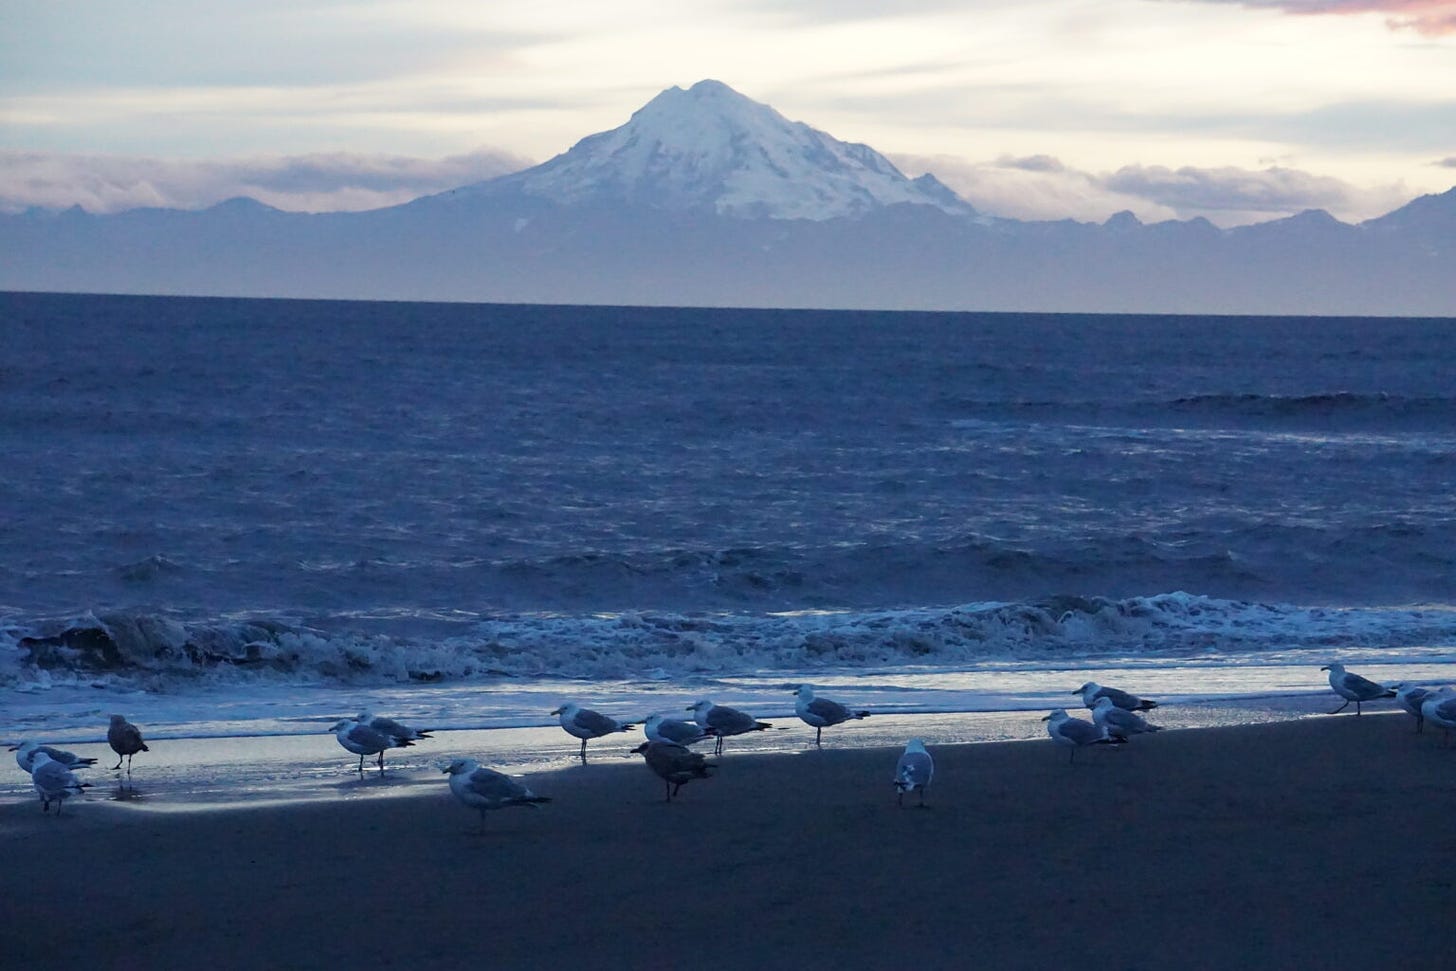 Waves lap on the Cook Inlet beach at Kenai on Aug. 14, 2018, with Redoubt Volcano looming over the opposite shore. The Cook Inlet region is teeming with renewable energy sources, including tidal and geothermal energy, experts say. (Photo by Yereth Rosen/Alaska Beacon)